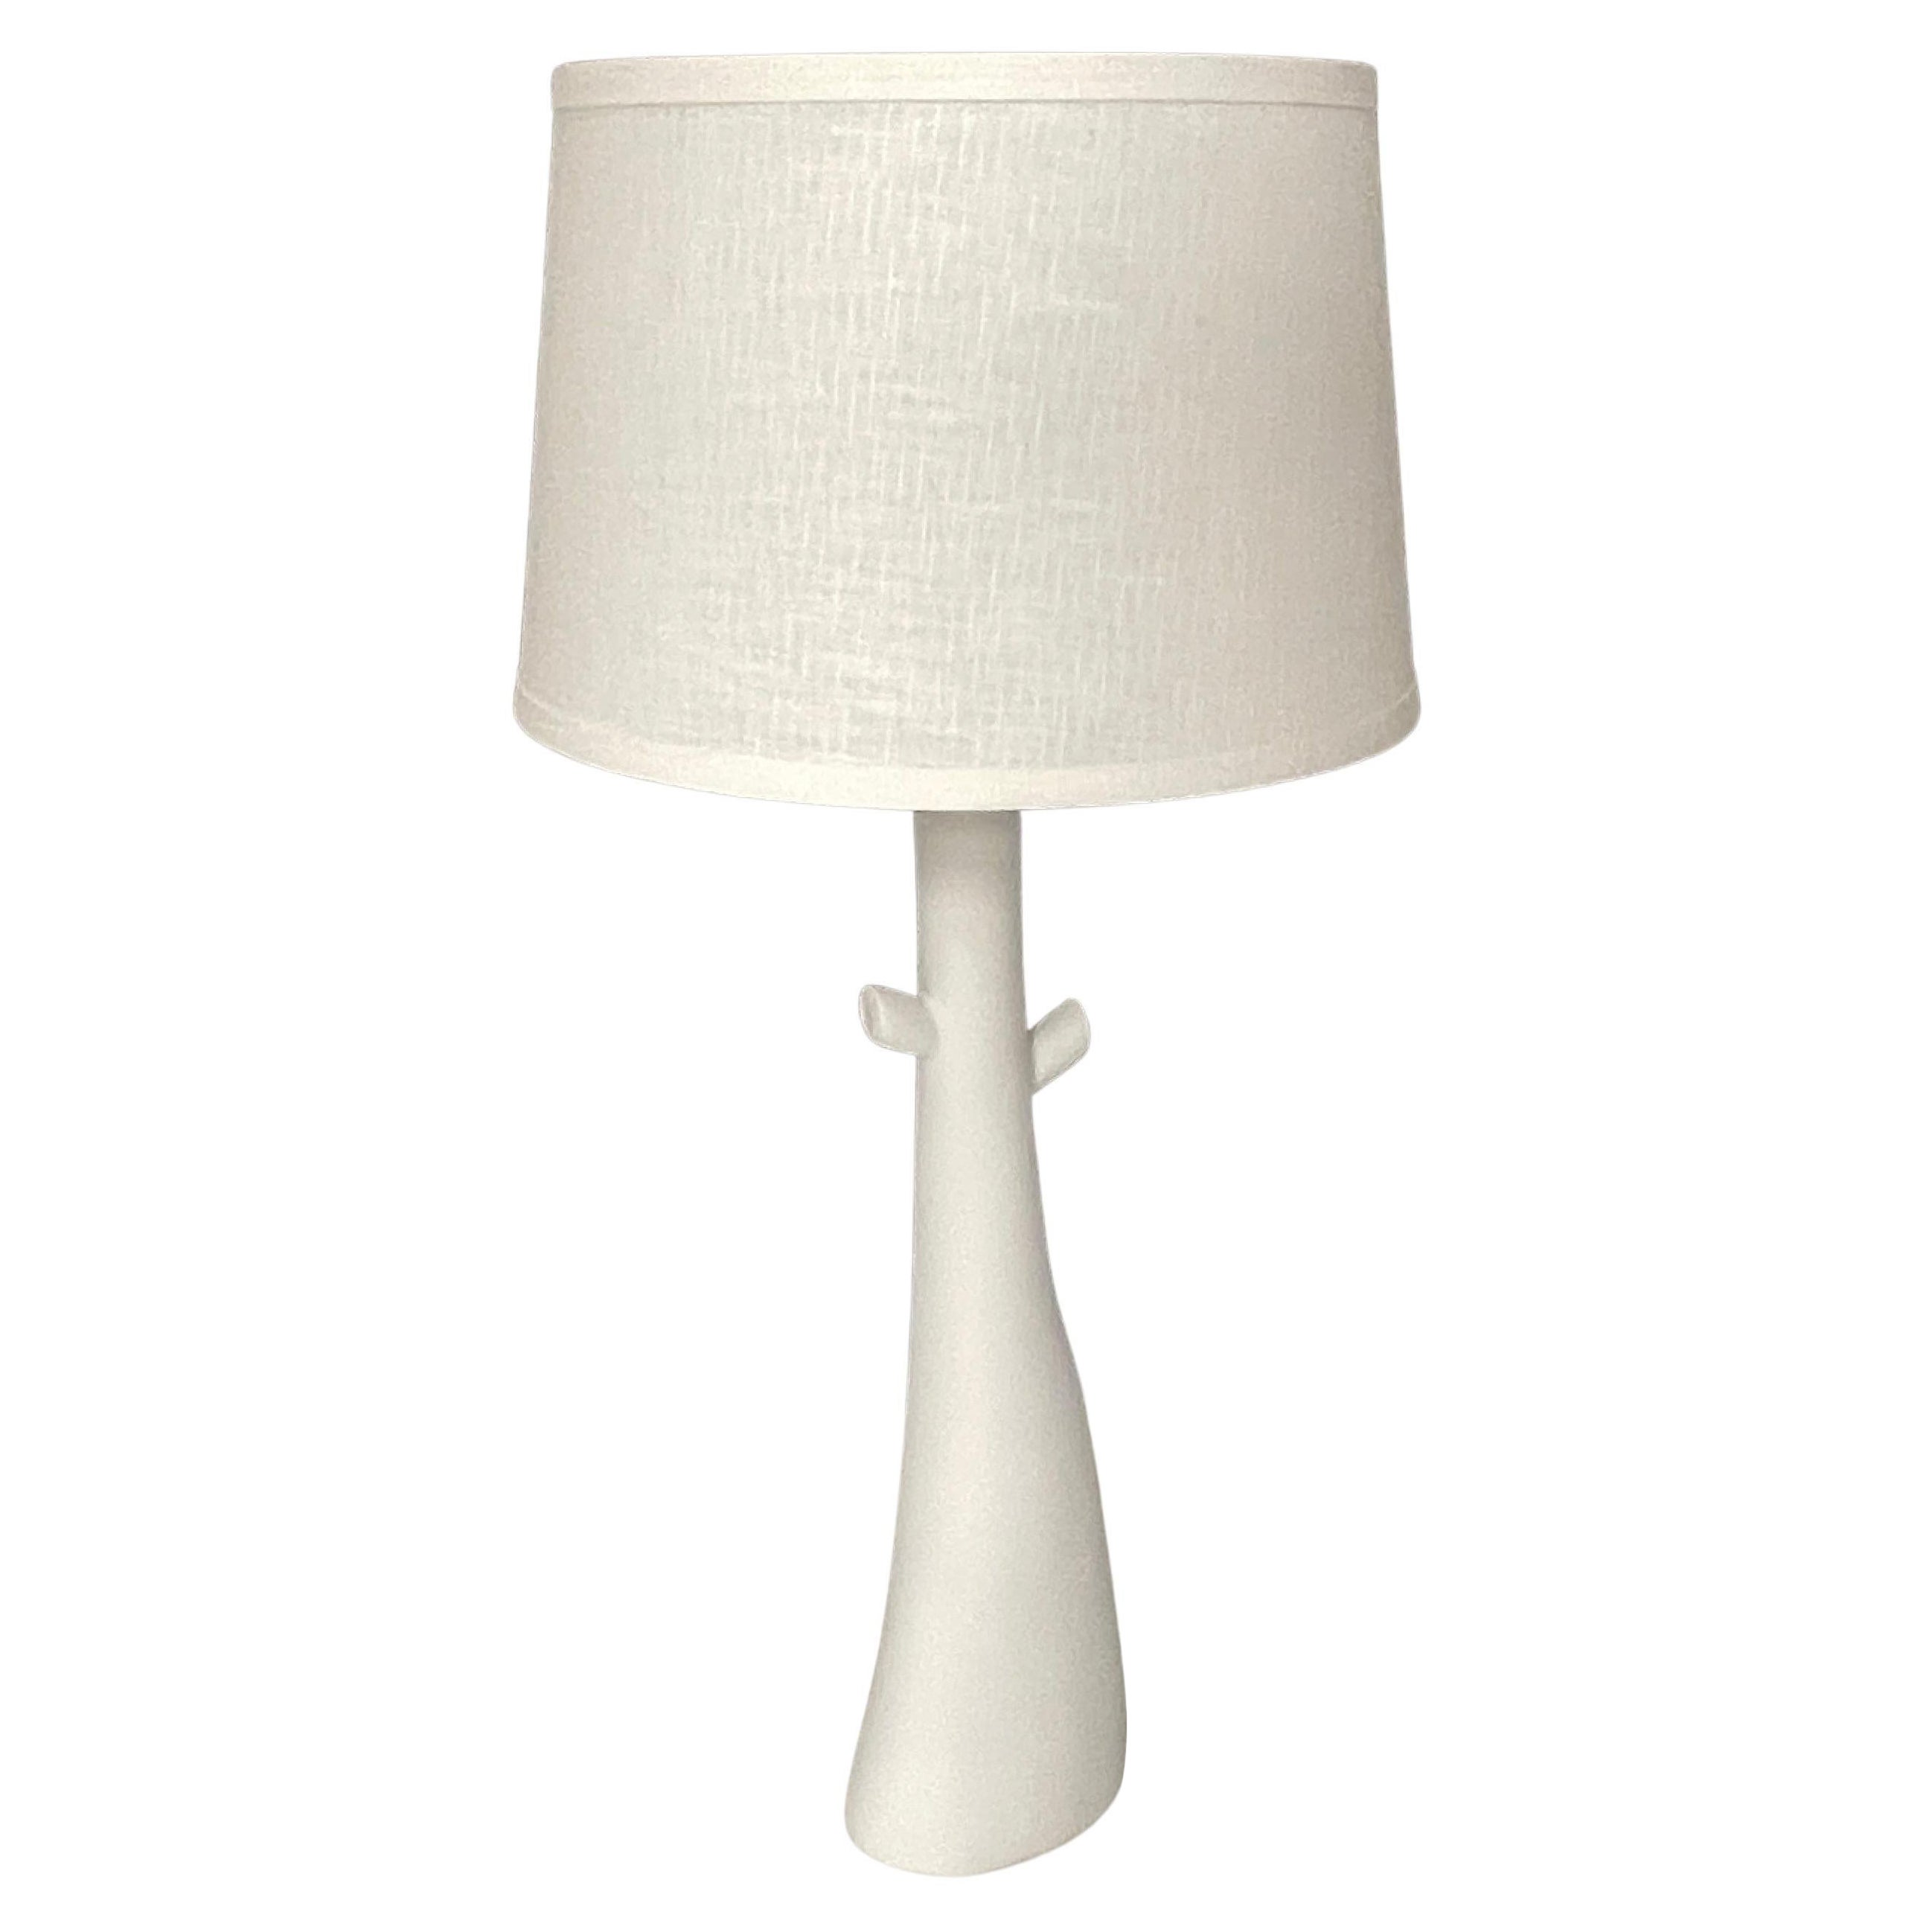 Monceau Table Lamp, by Bourgeois Boheme Atelier For Sale